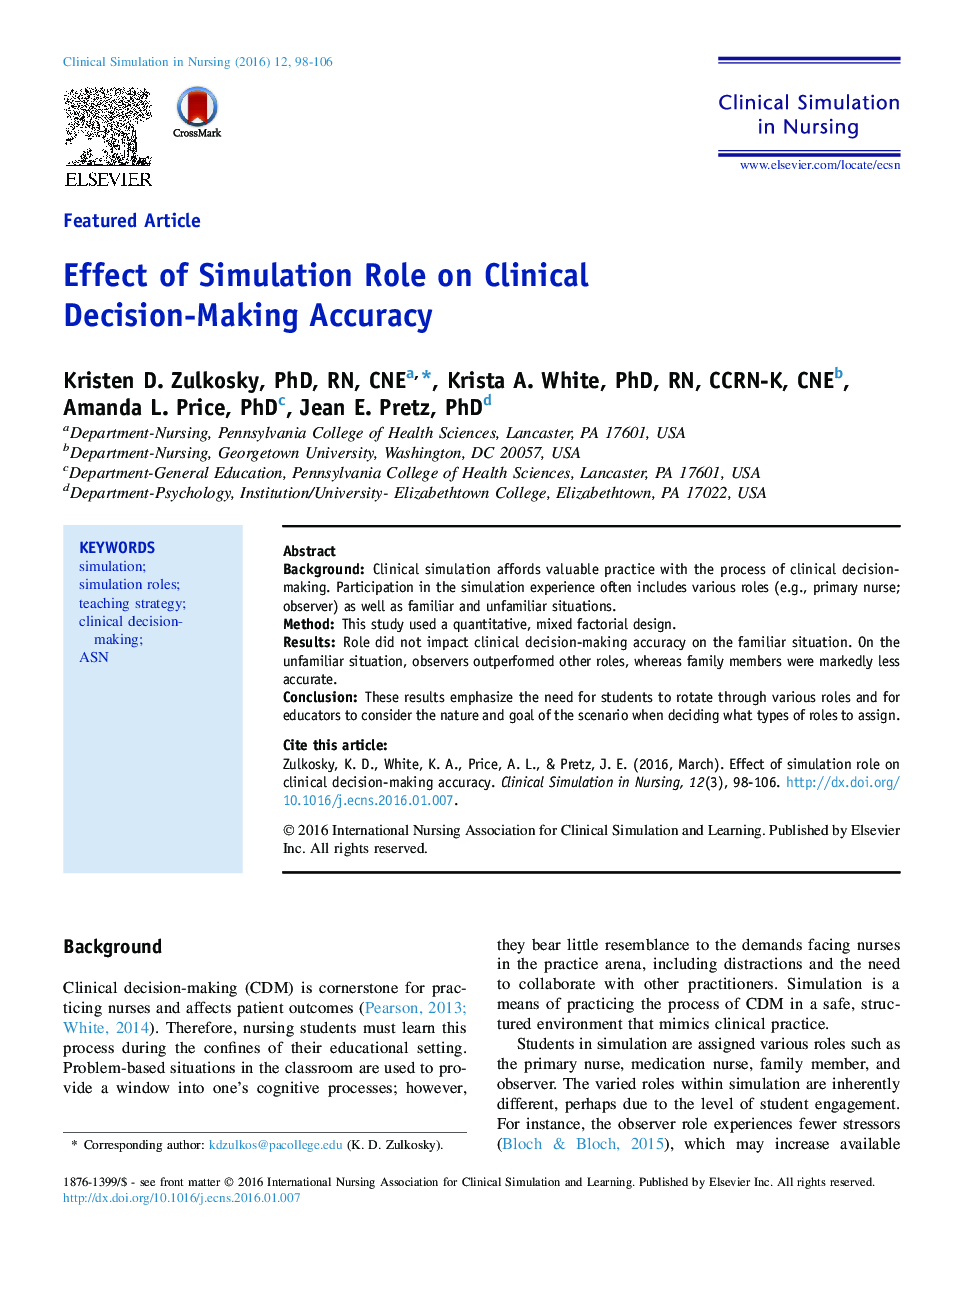 Effect of Simulation Role on Clinical Decision-Making Accuracy